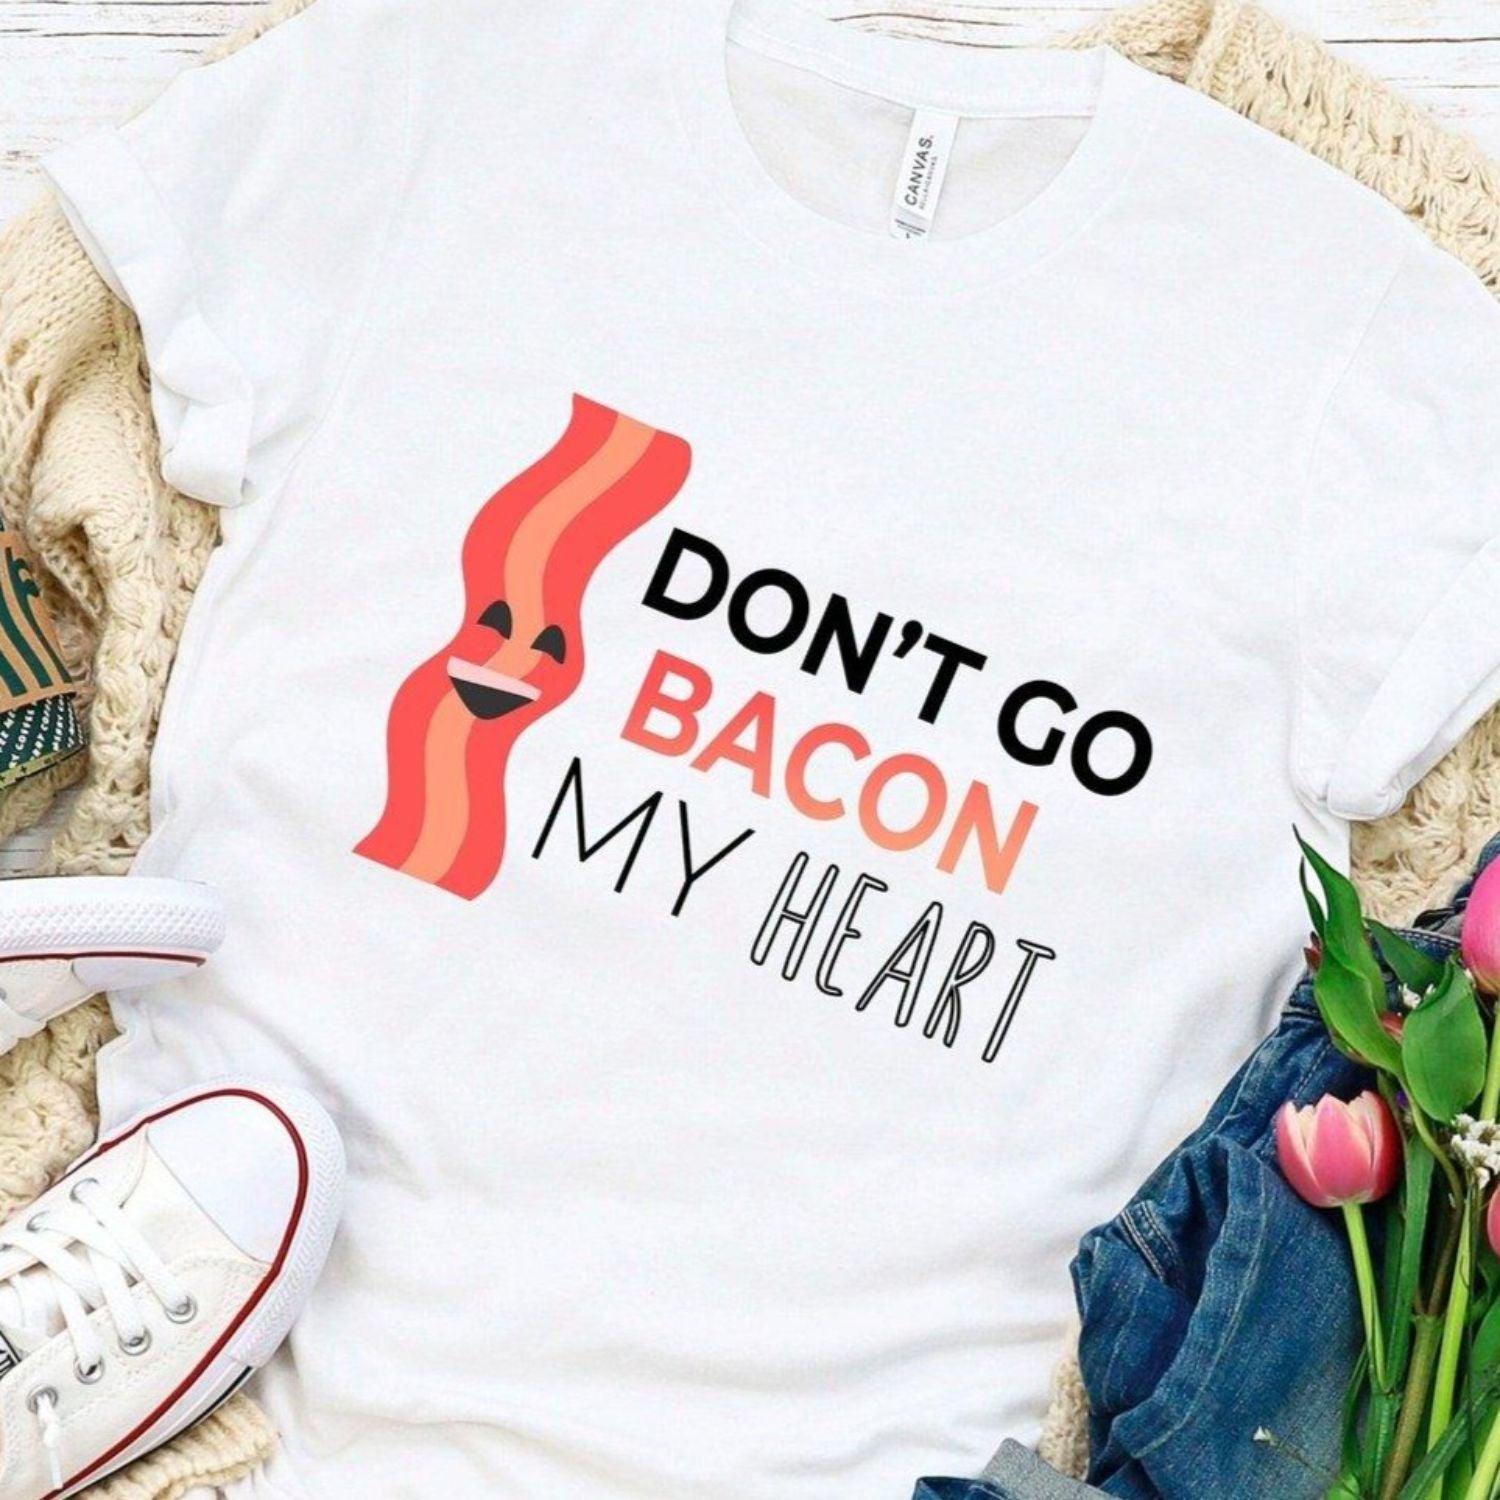 Couples Don't go Bacon my heart/I couldn’t if I fried - Matching Set for Couples - 4Lovebirds